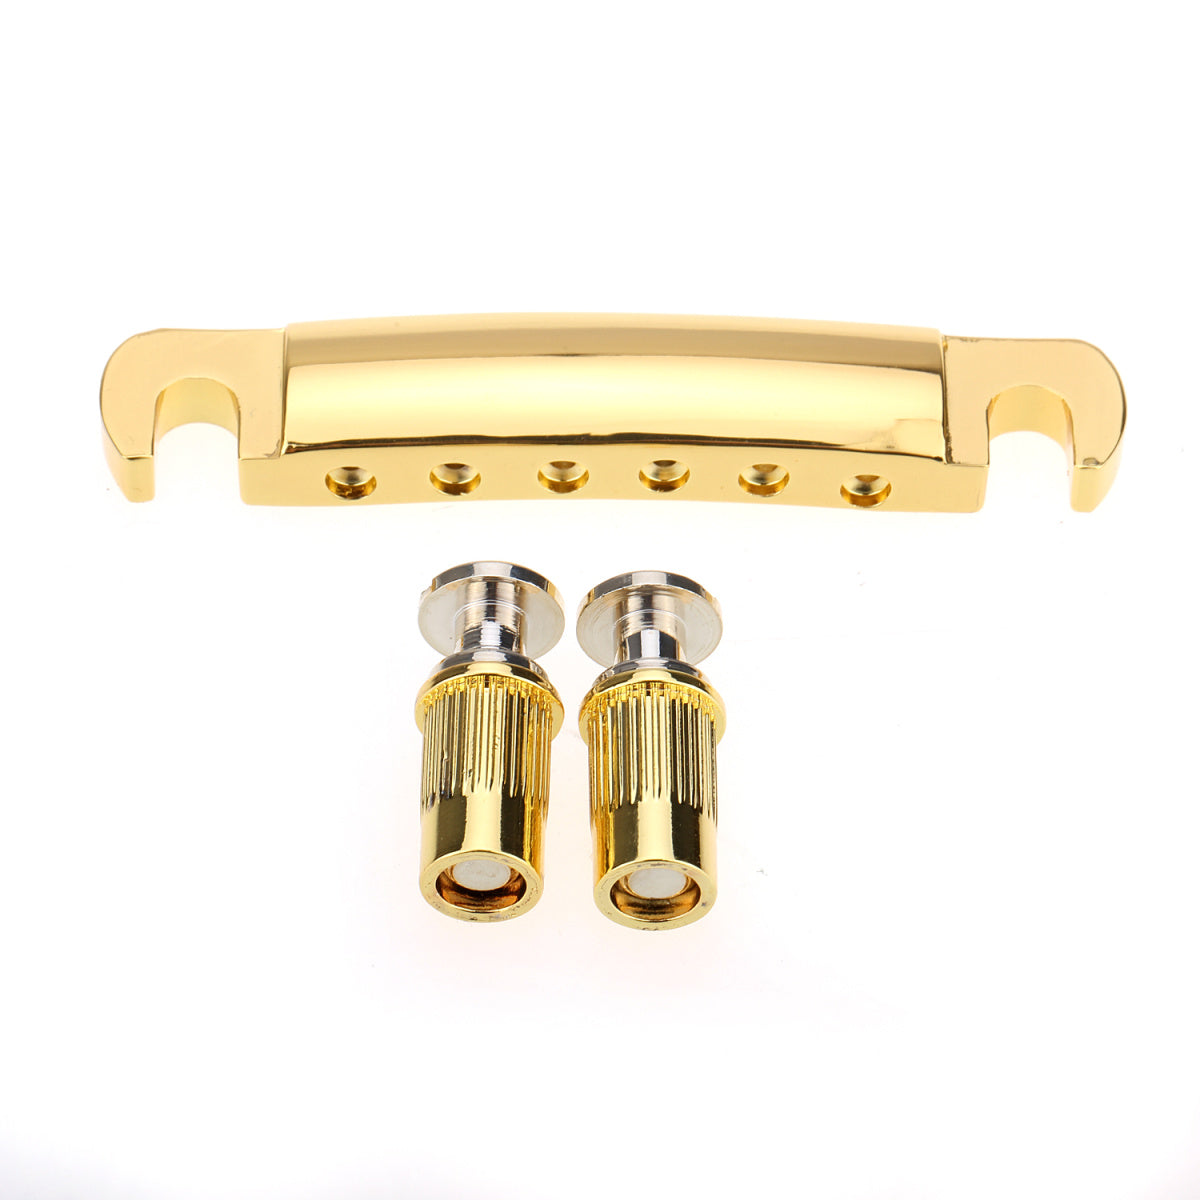 Musiclily Pro 52.5mm TOM Tune-o-matic Tailpiece for China made Epiphone Les Paul Guitar Replacement, Gold